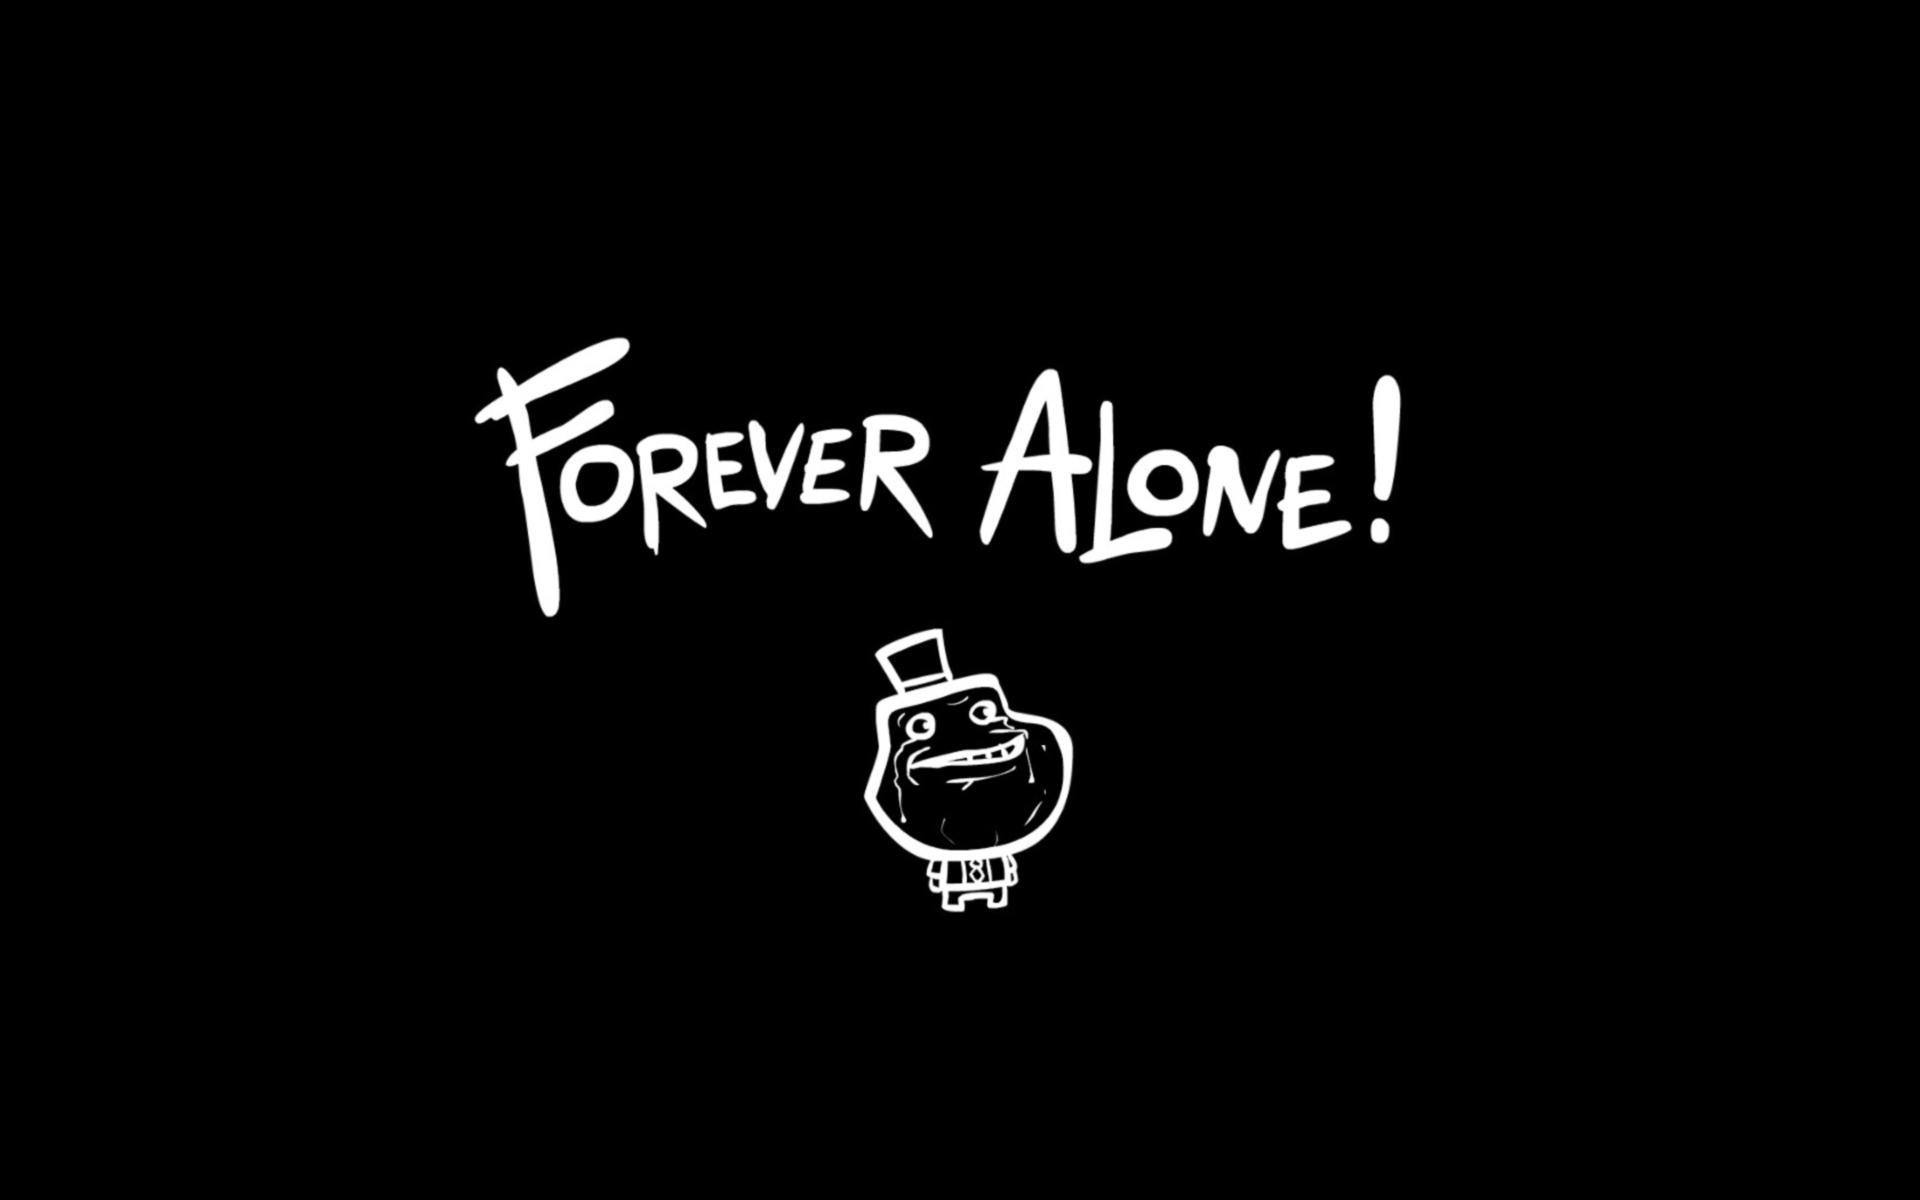 Forever alone funny hd wallpaper